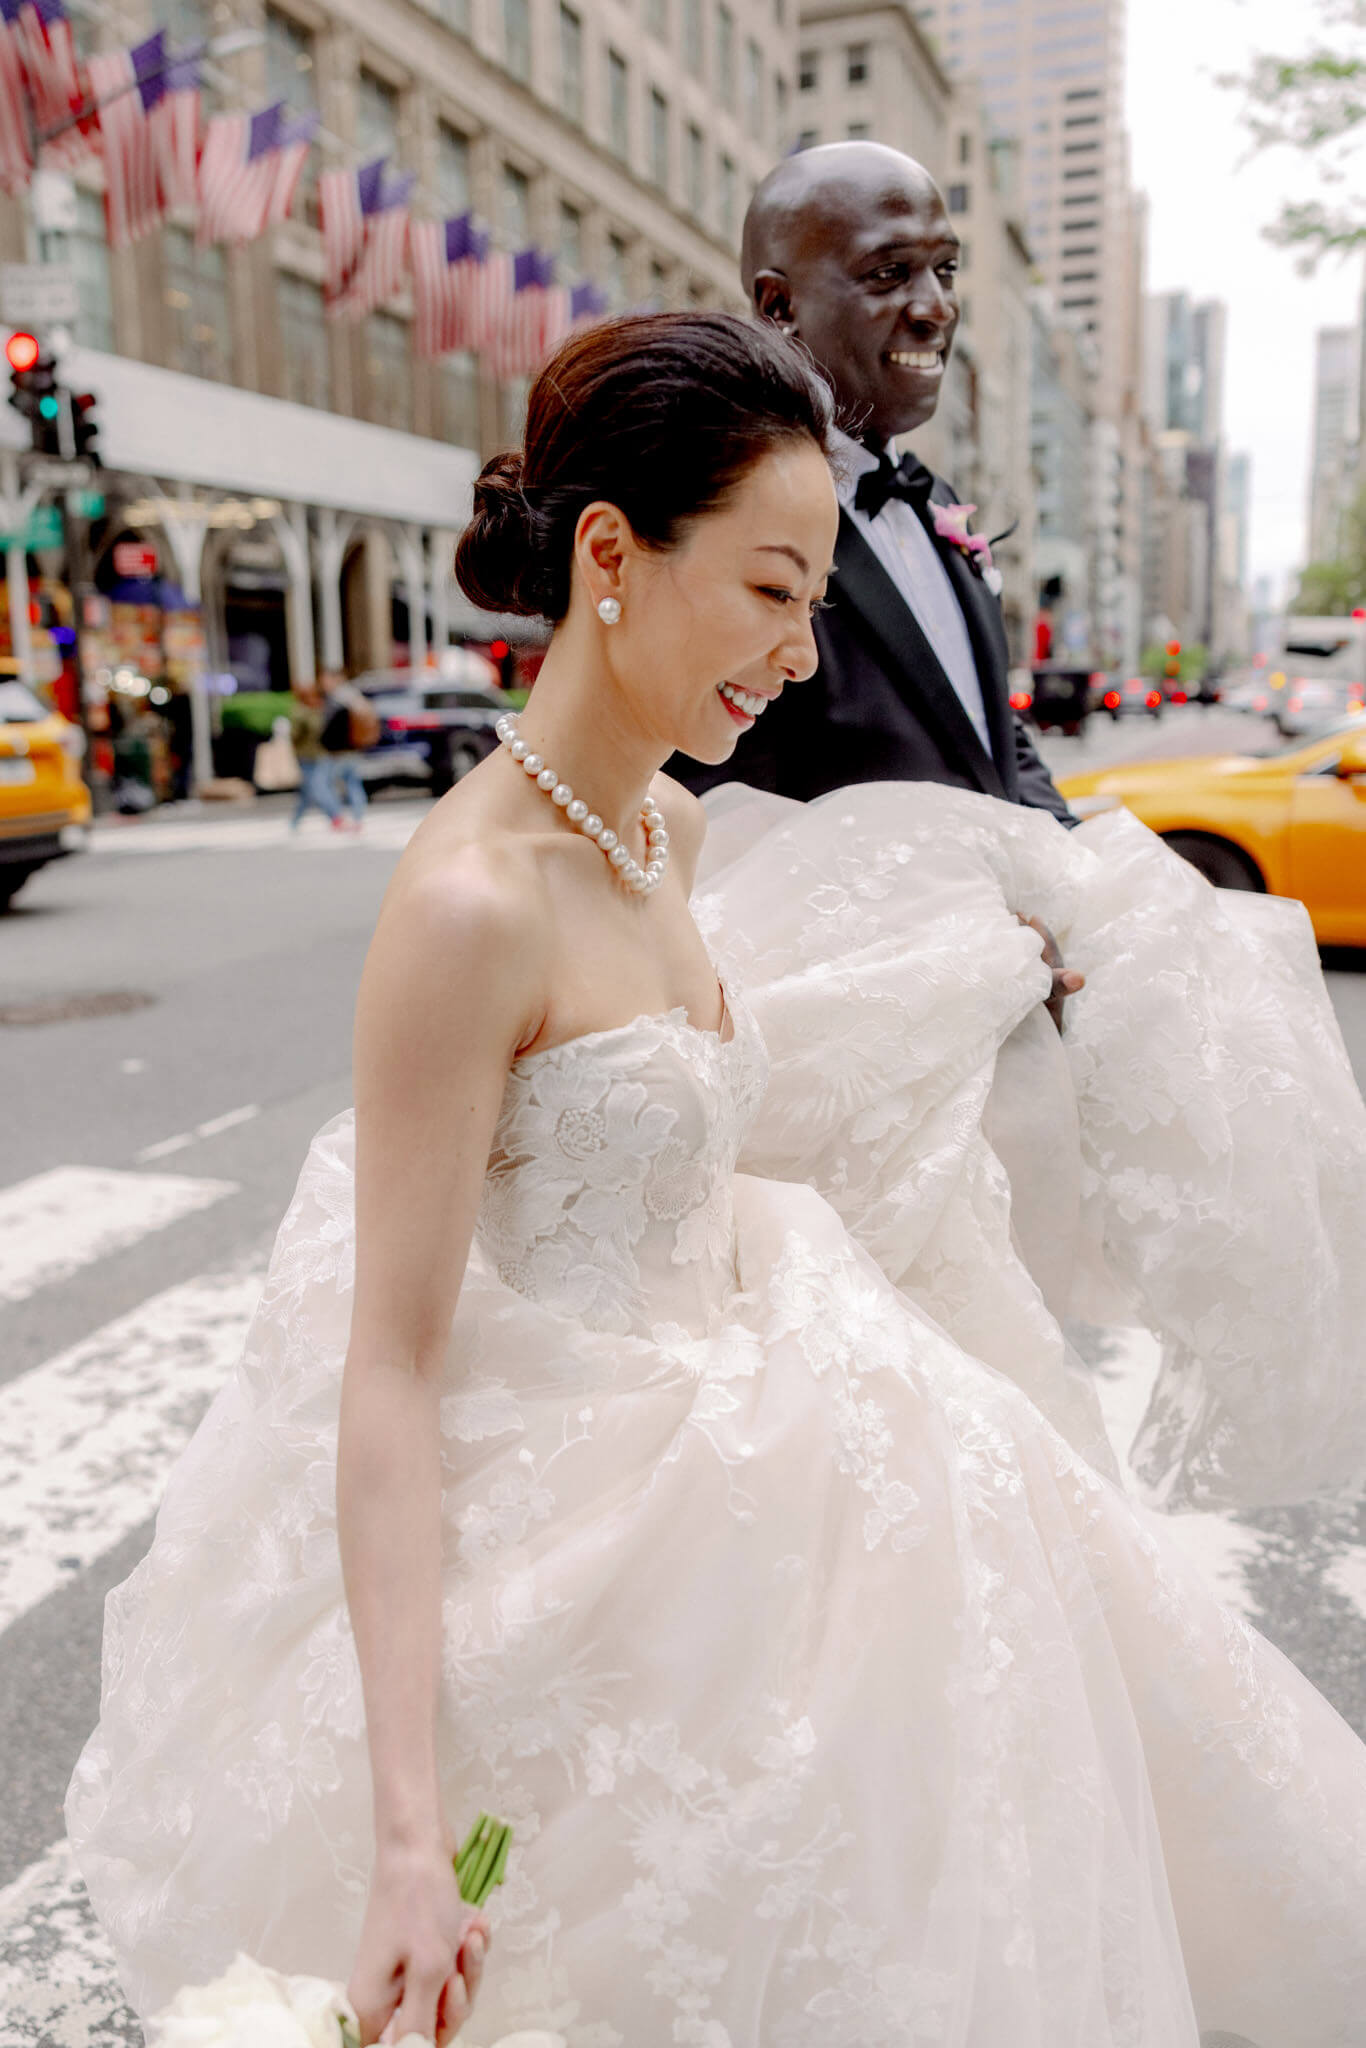 The bride and groom are crossing the streets of New York. Image by Jenny Fu Studio